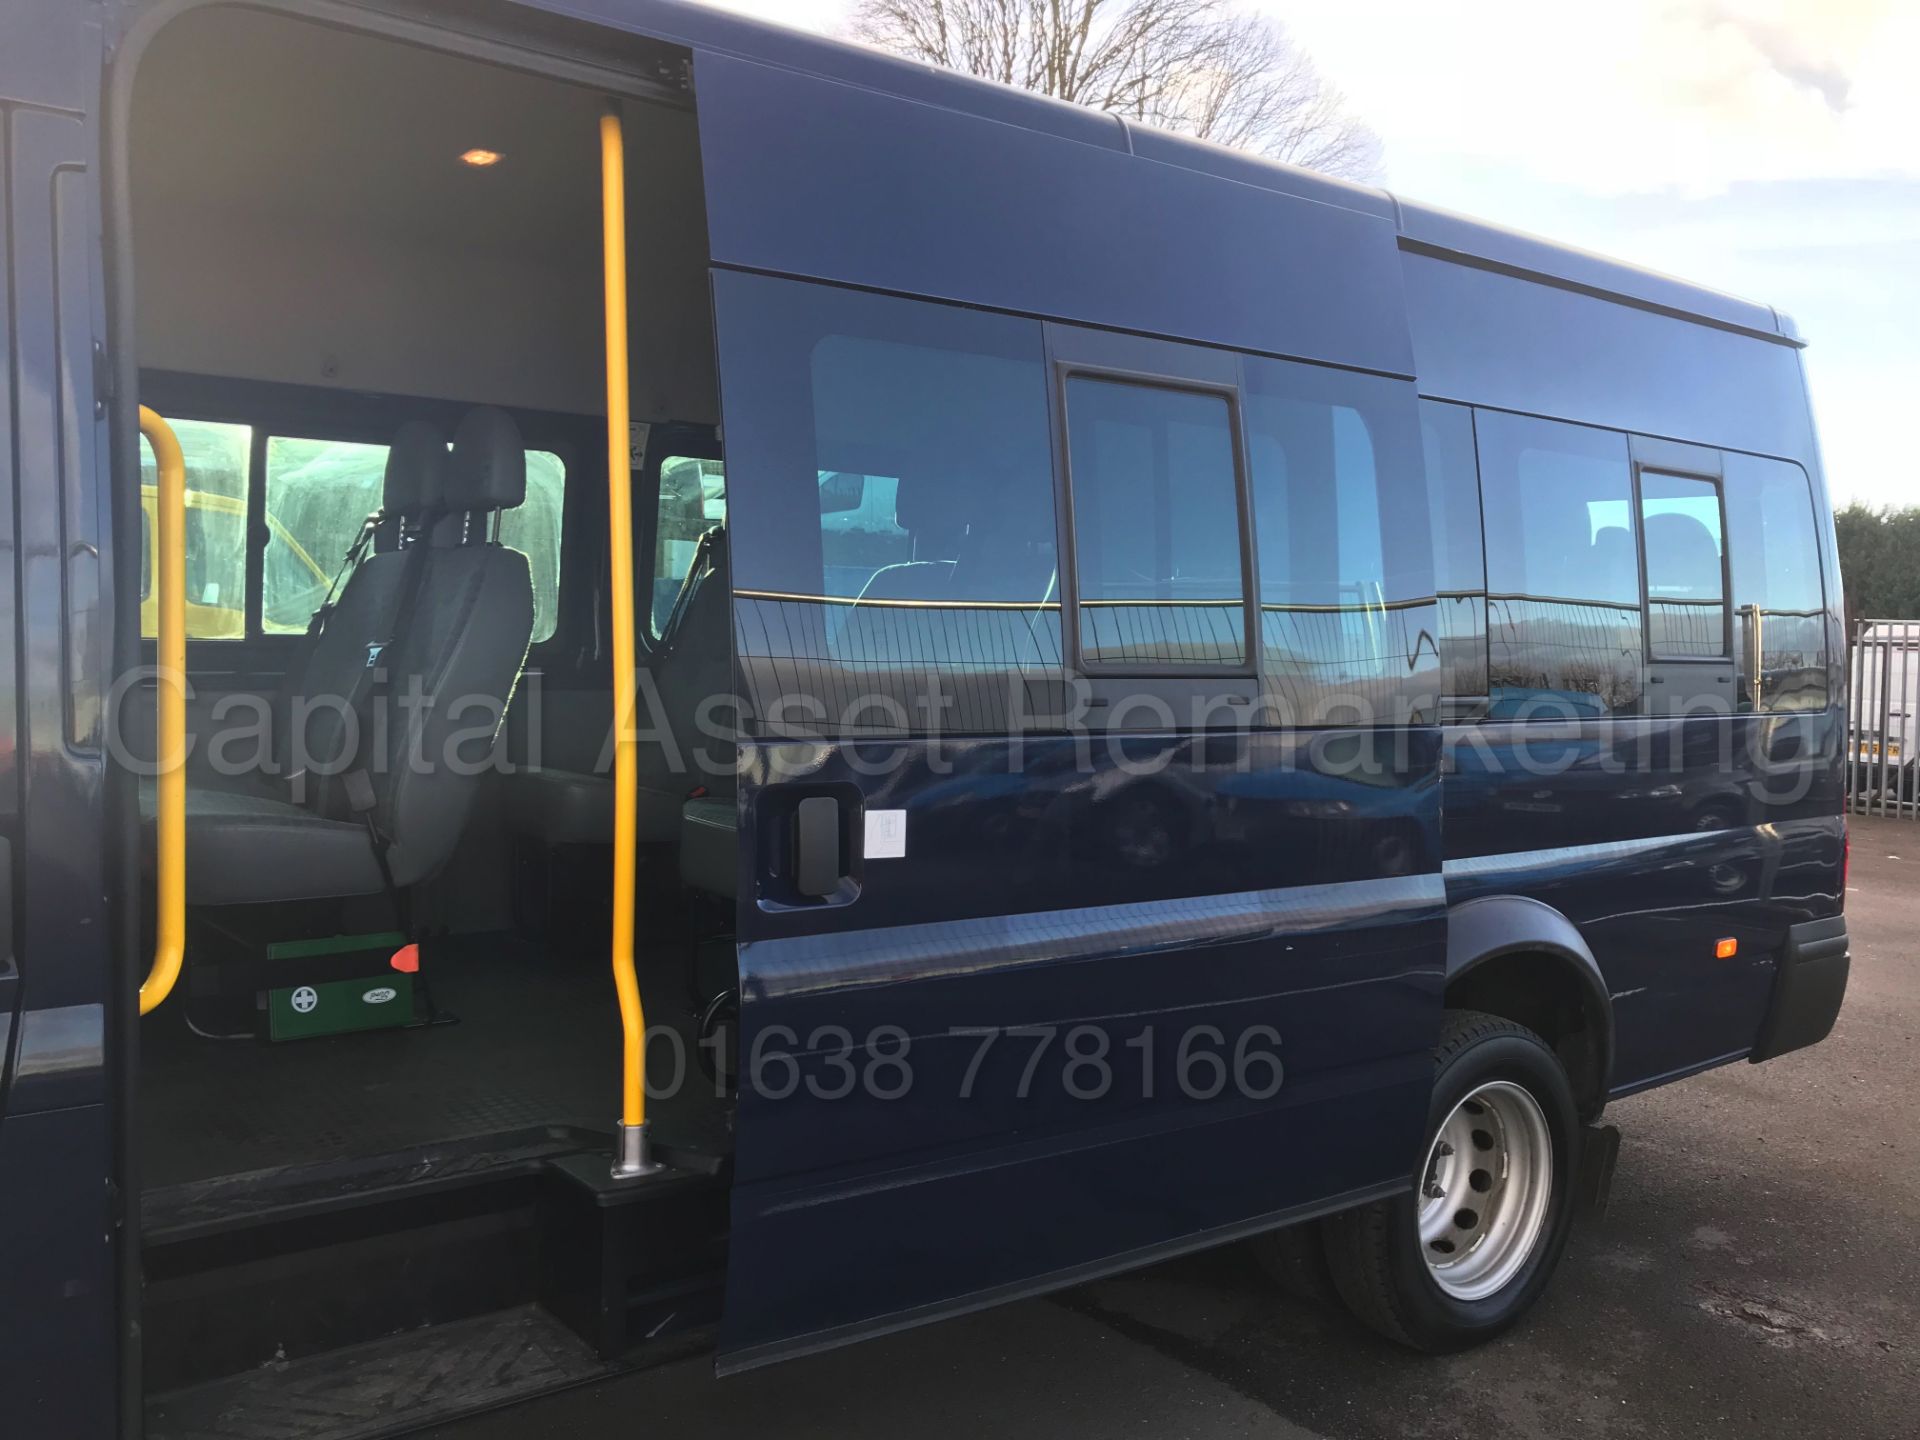 (On Sale) FORD TRANSIT 135 T430 'XLWB -17 SEATER MINI-BUS' (2014 MODEL) '1 OWNER' *5,000 MILES ONLY* - Image 23 of 36